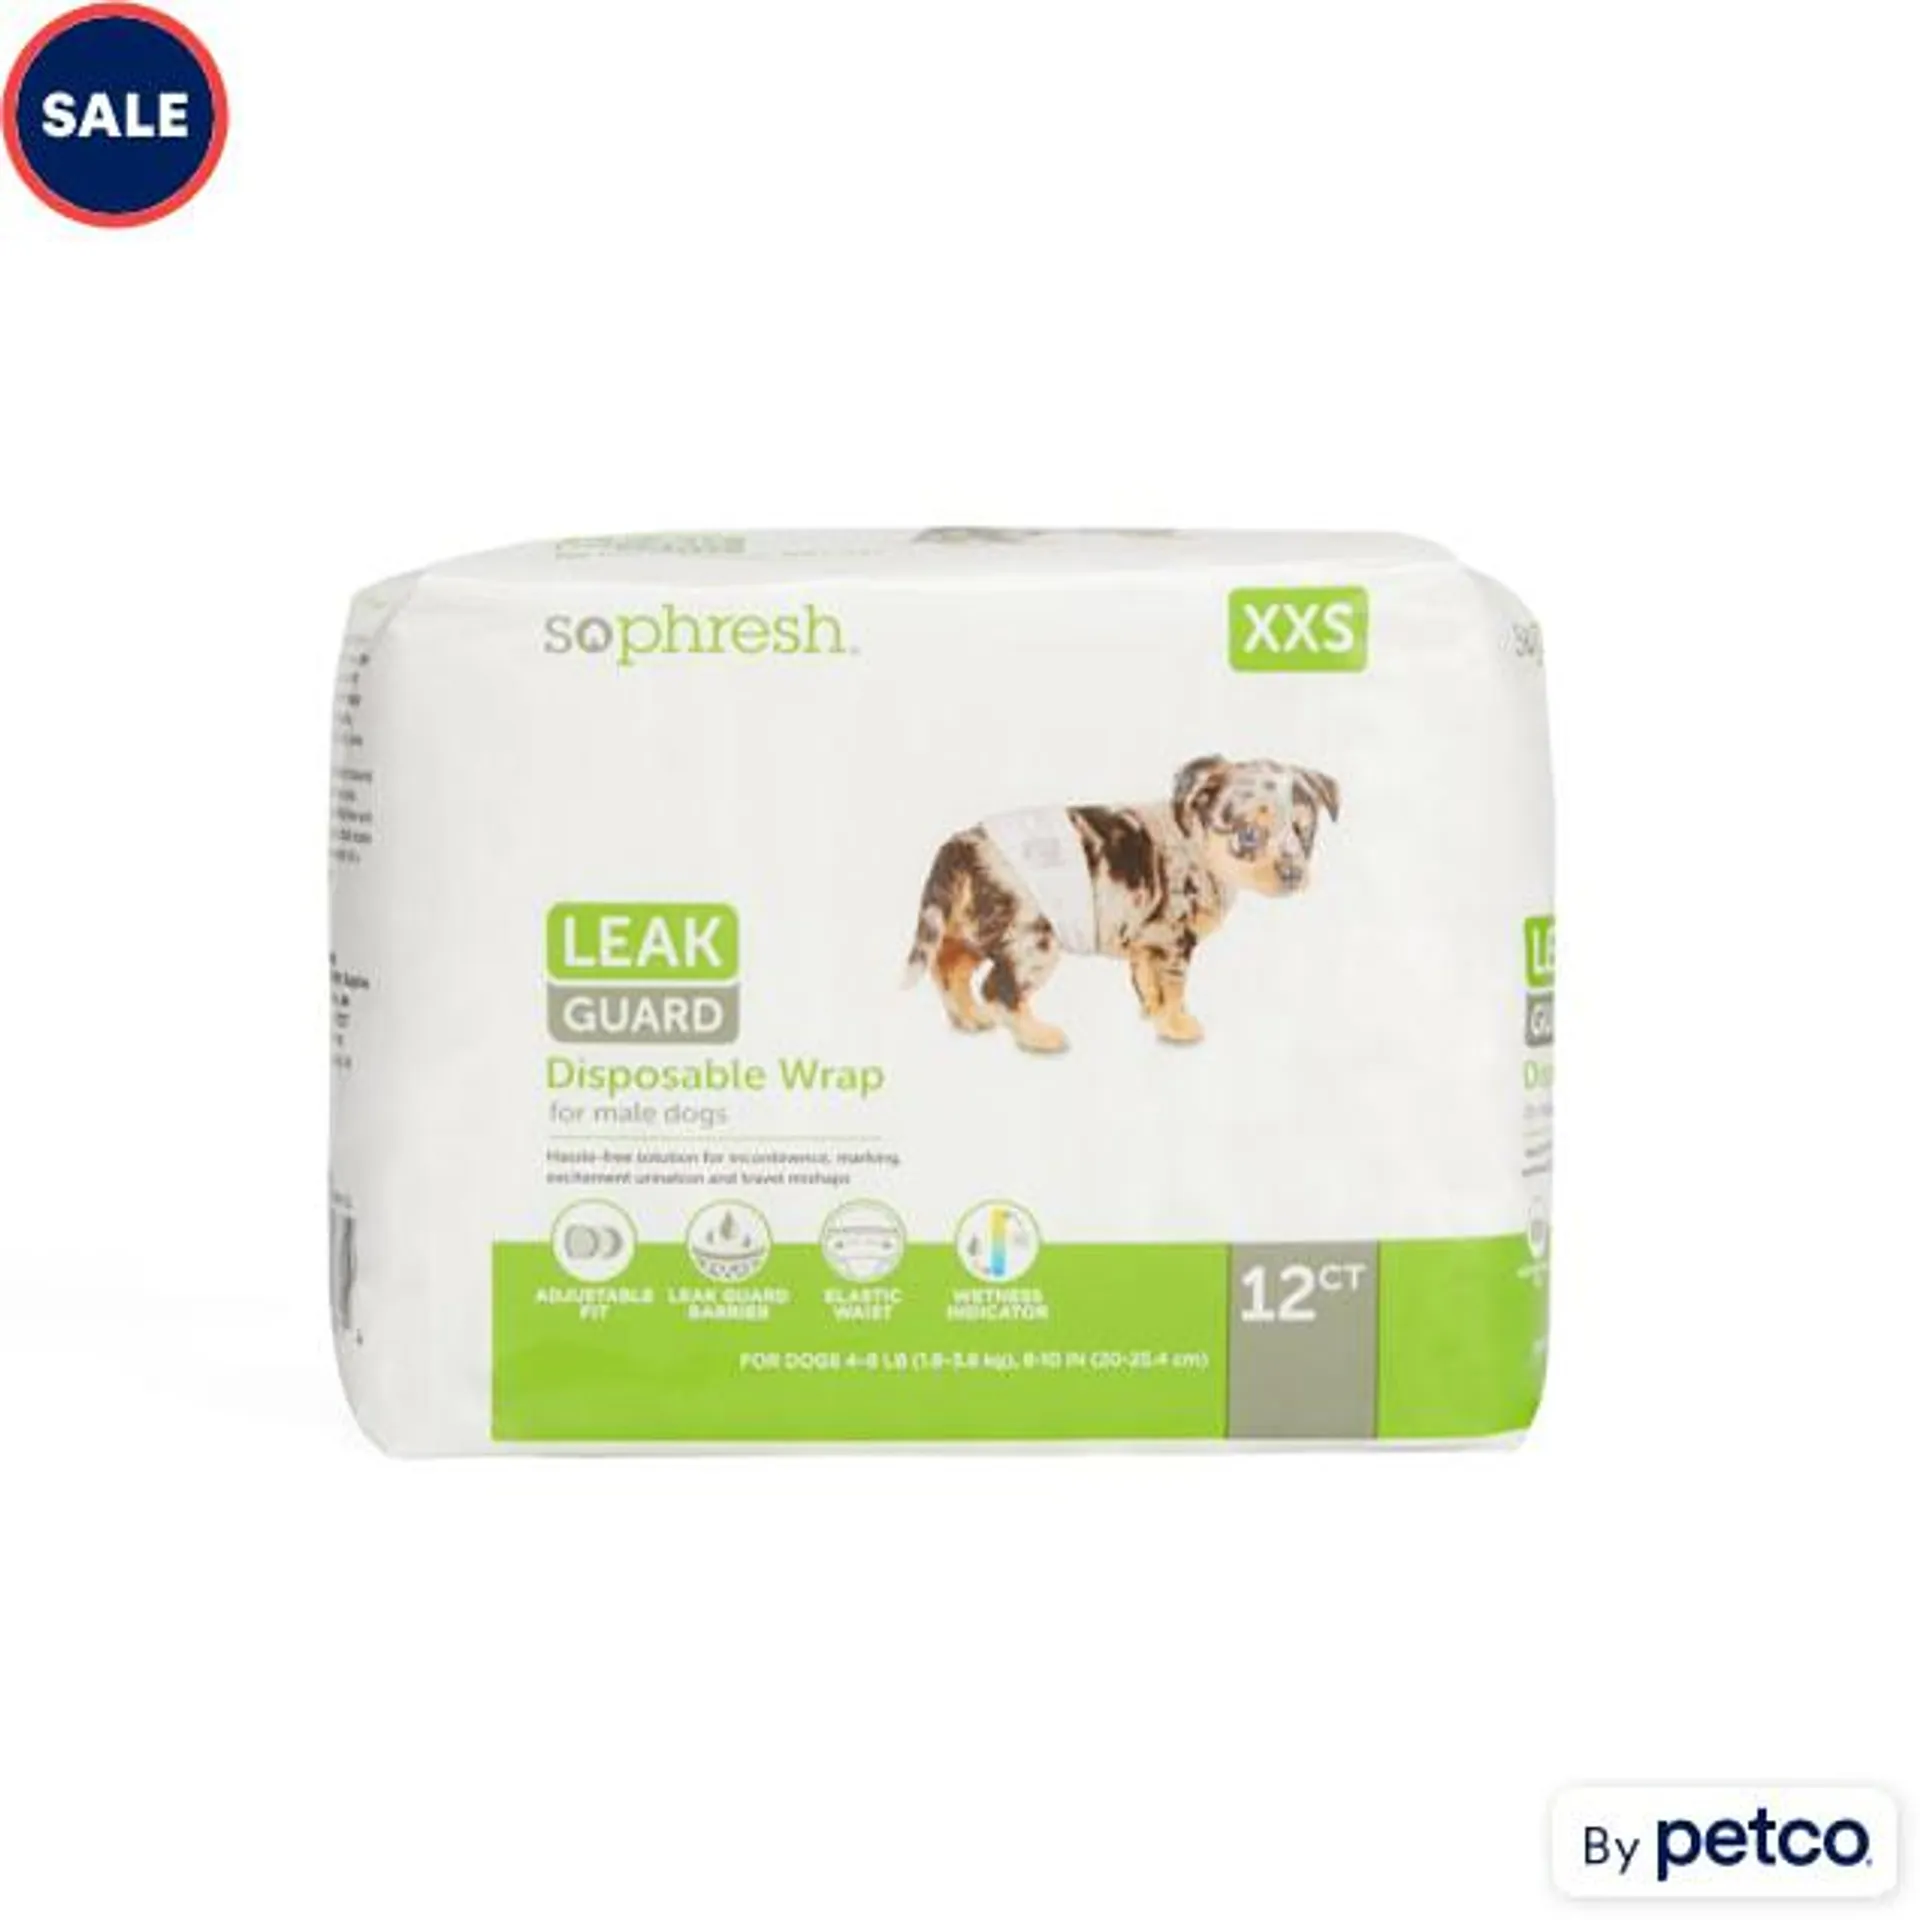 So Phresh Leak Guard Disposable Wrap For Male Dogs, XX-Small, Count of 12